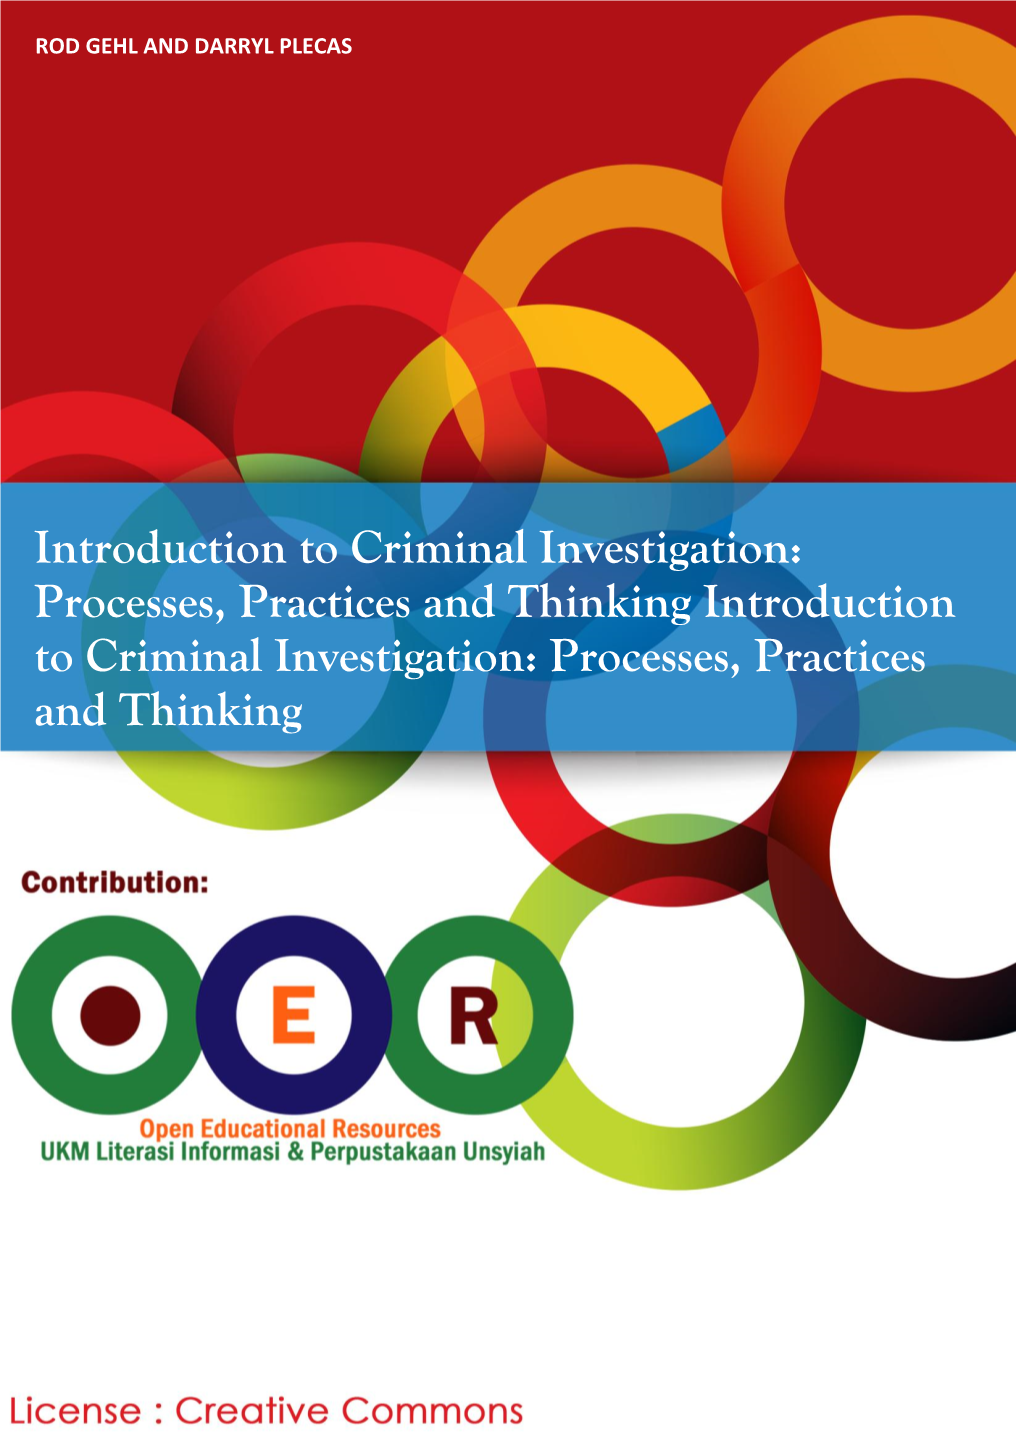 Introduction to Criminal Investigation: Processes, Practices and Thinking